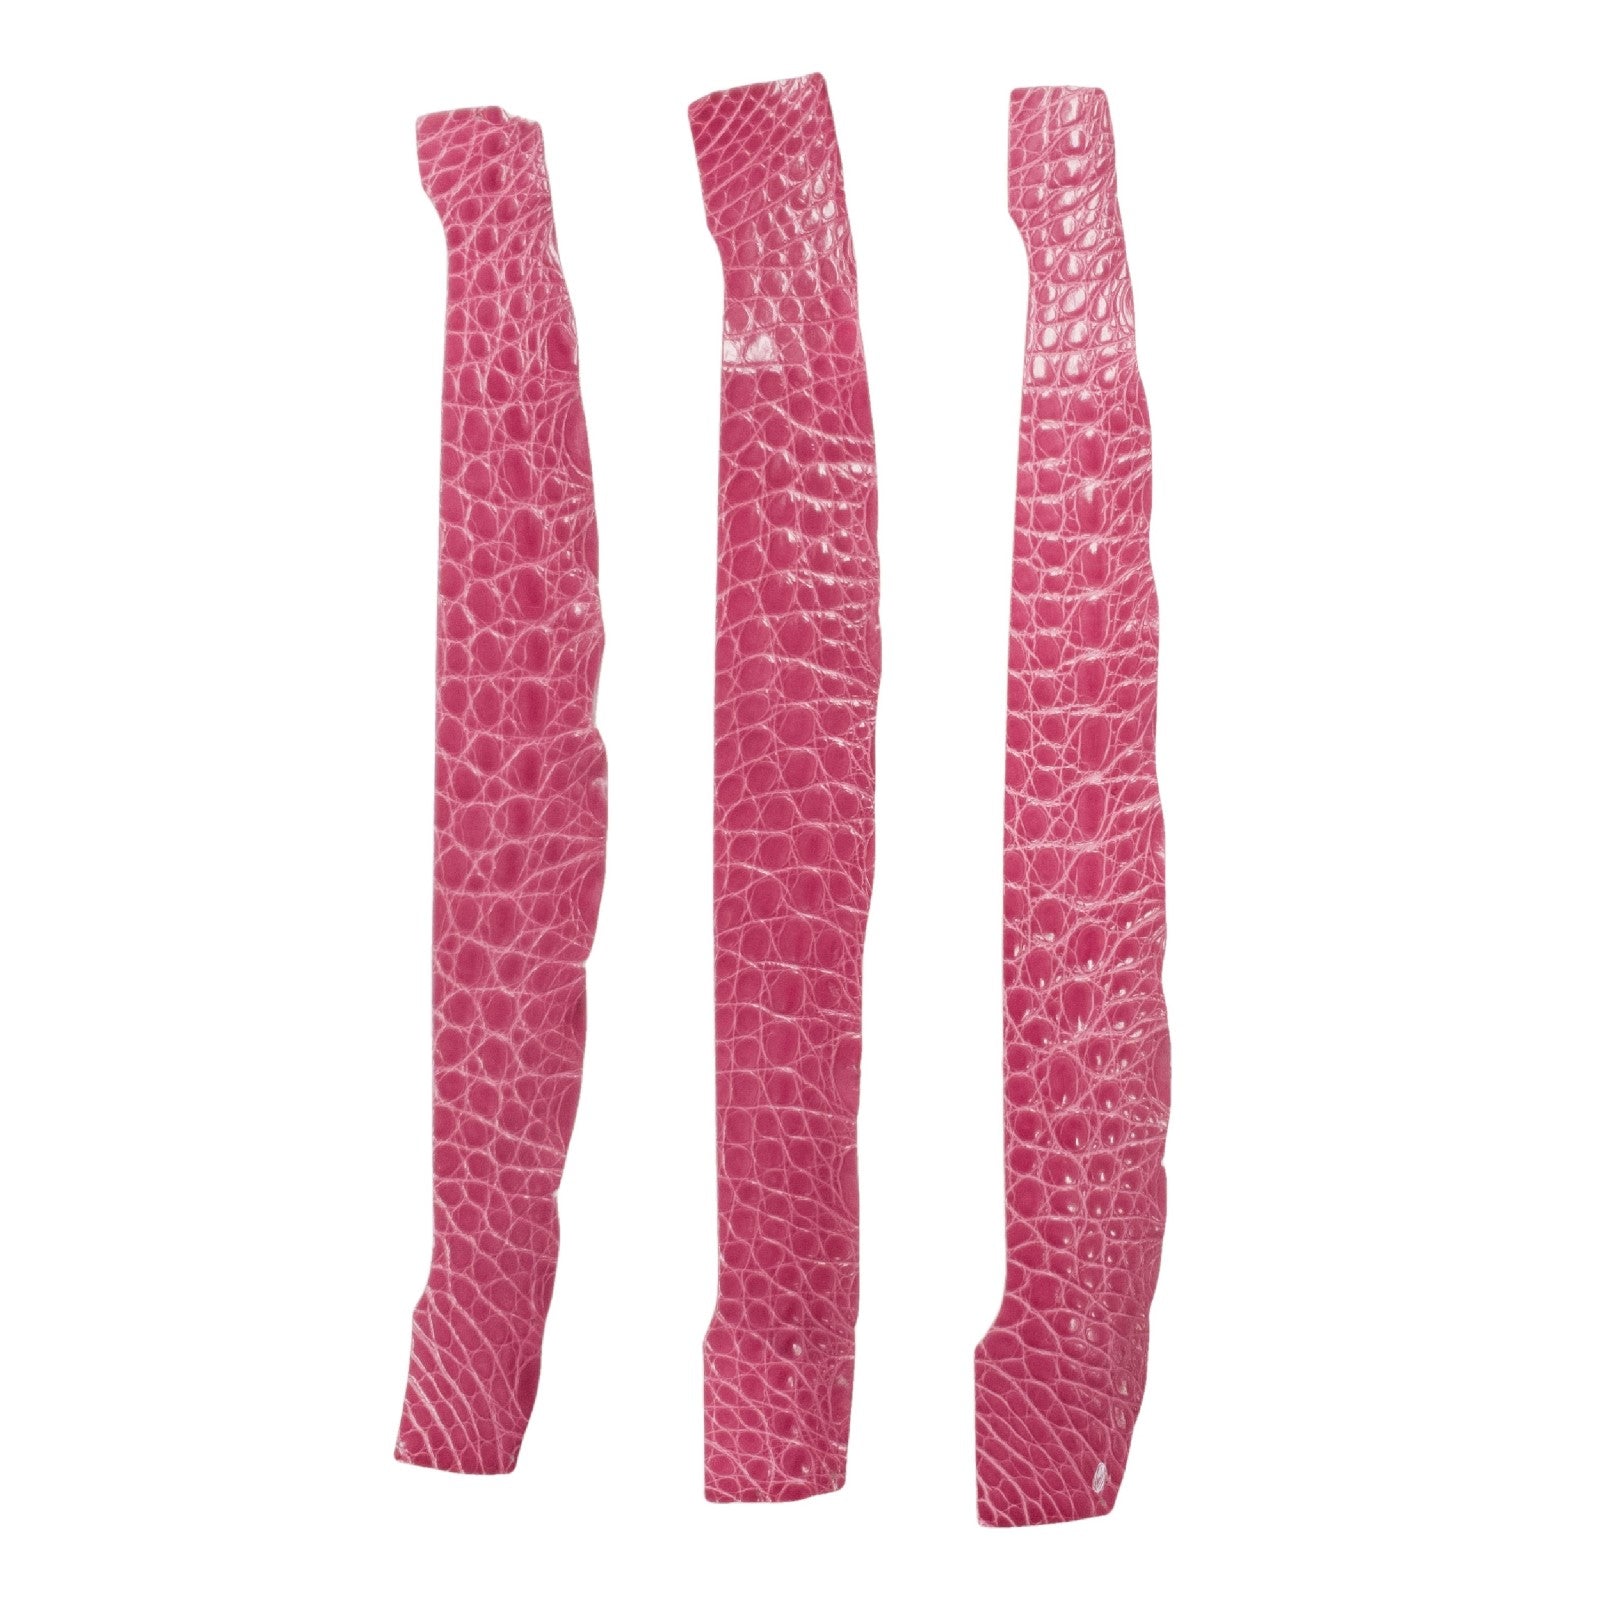 Alligator Skin Pieces Various Colors Genuine Hide, Pink / Strap 1 | The Leather Guy